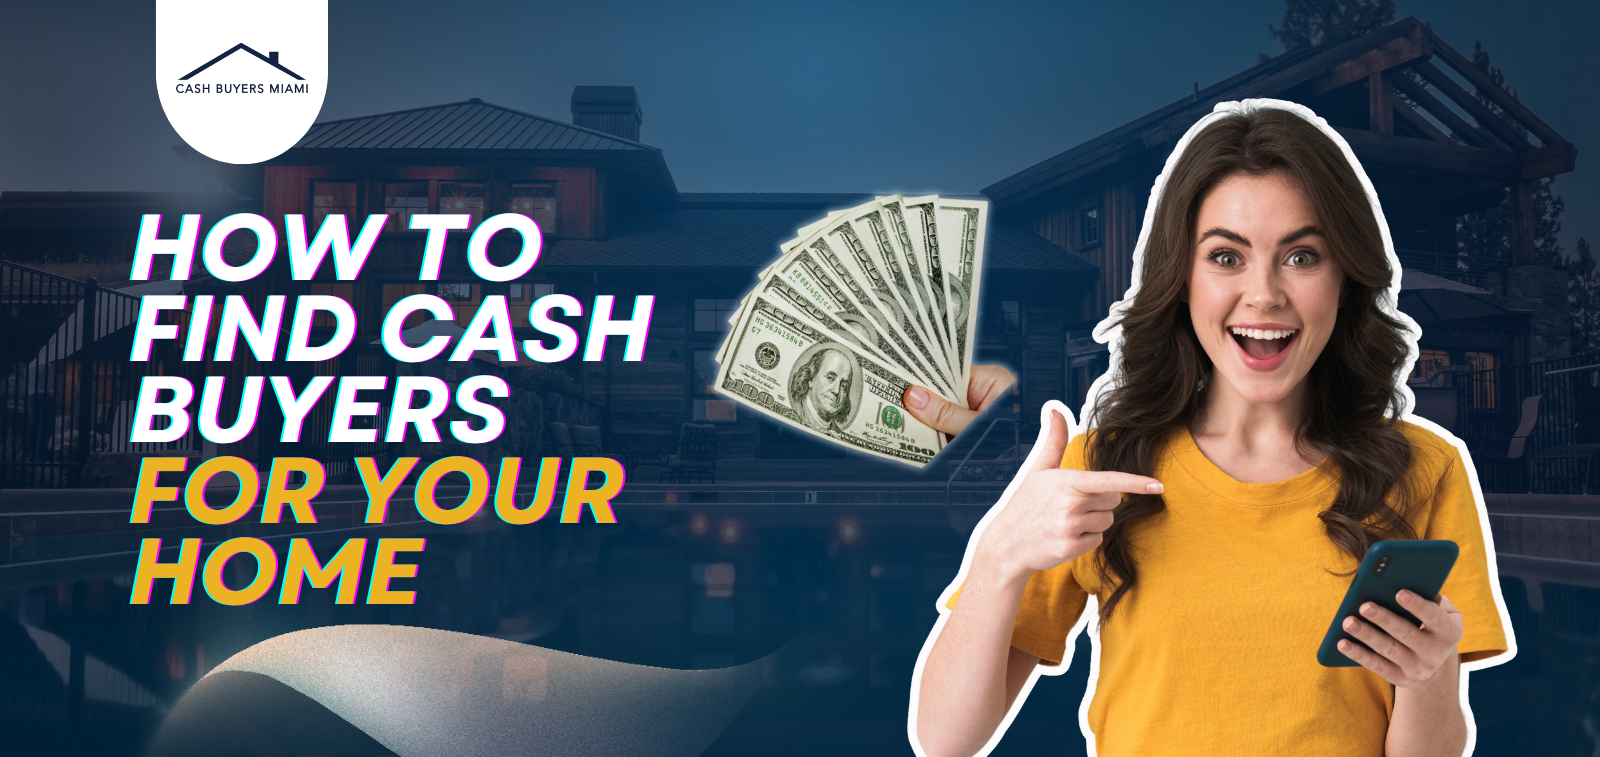 How to Find Cash Buyers for Your Home